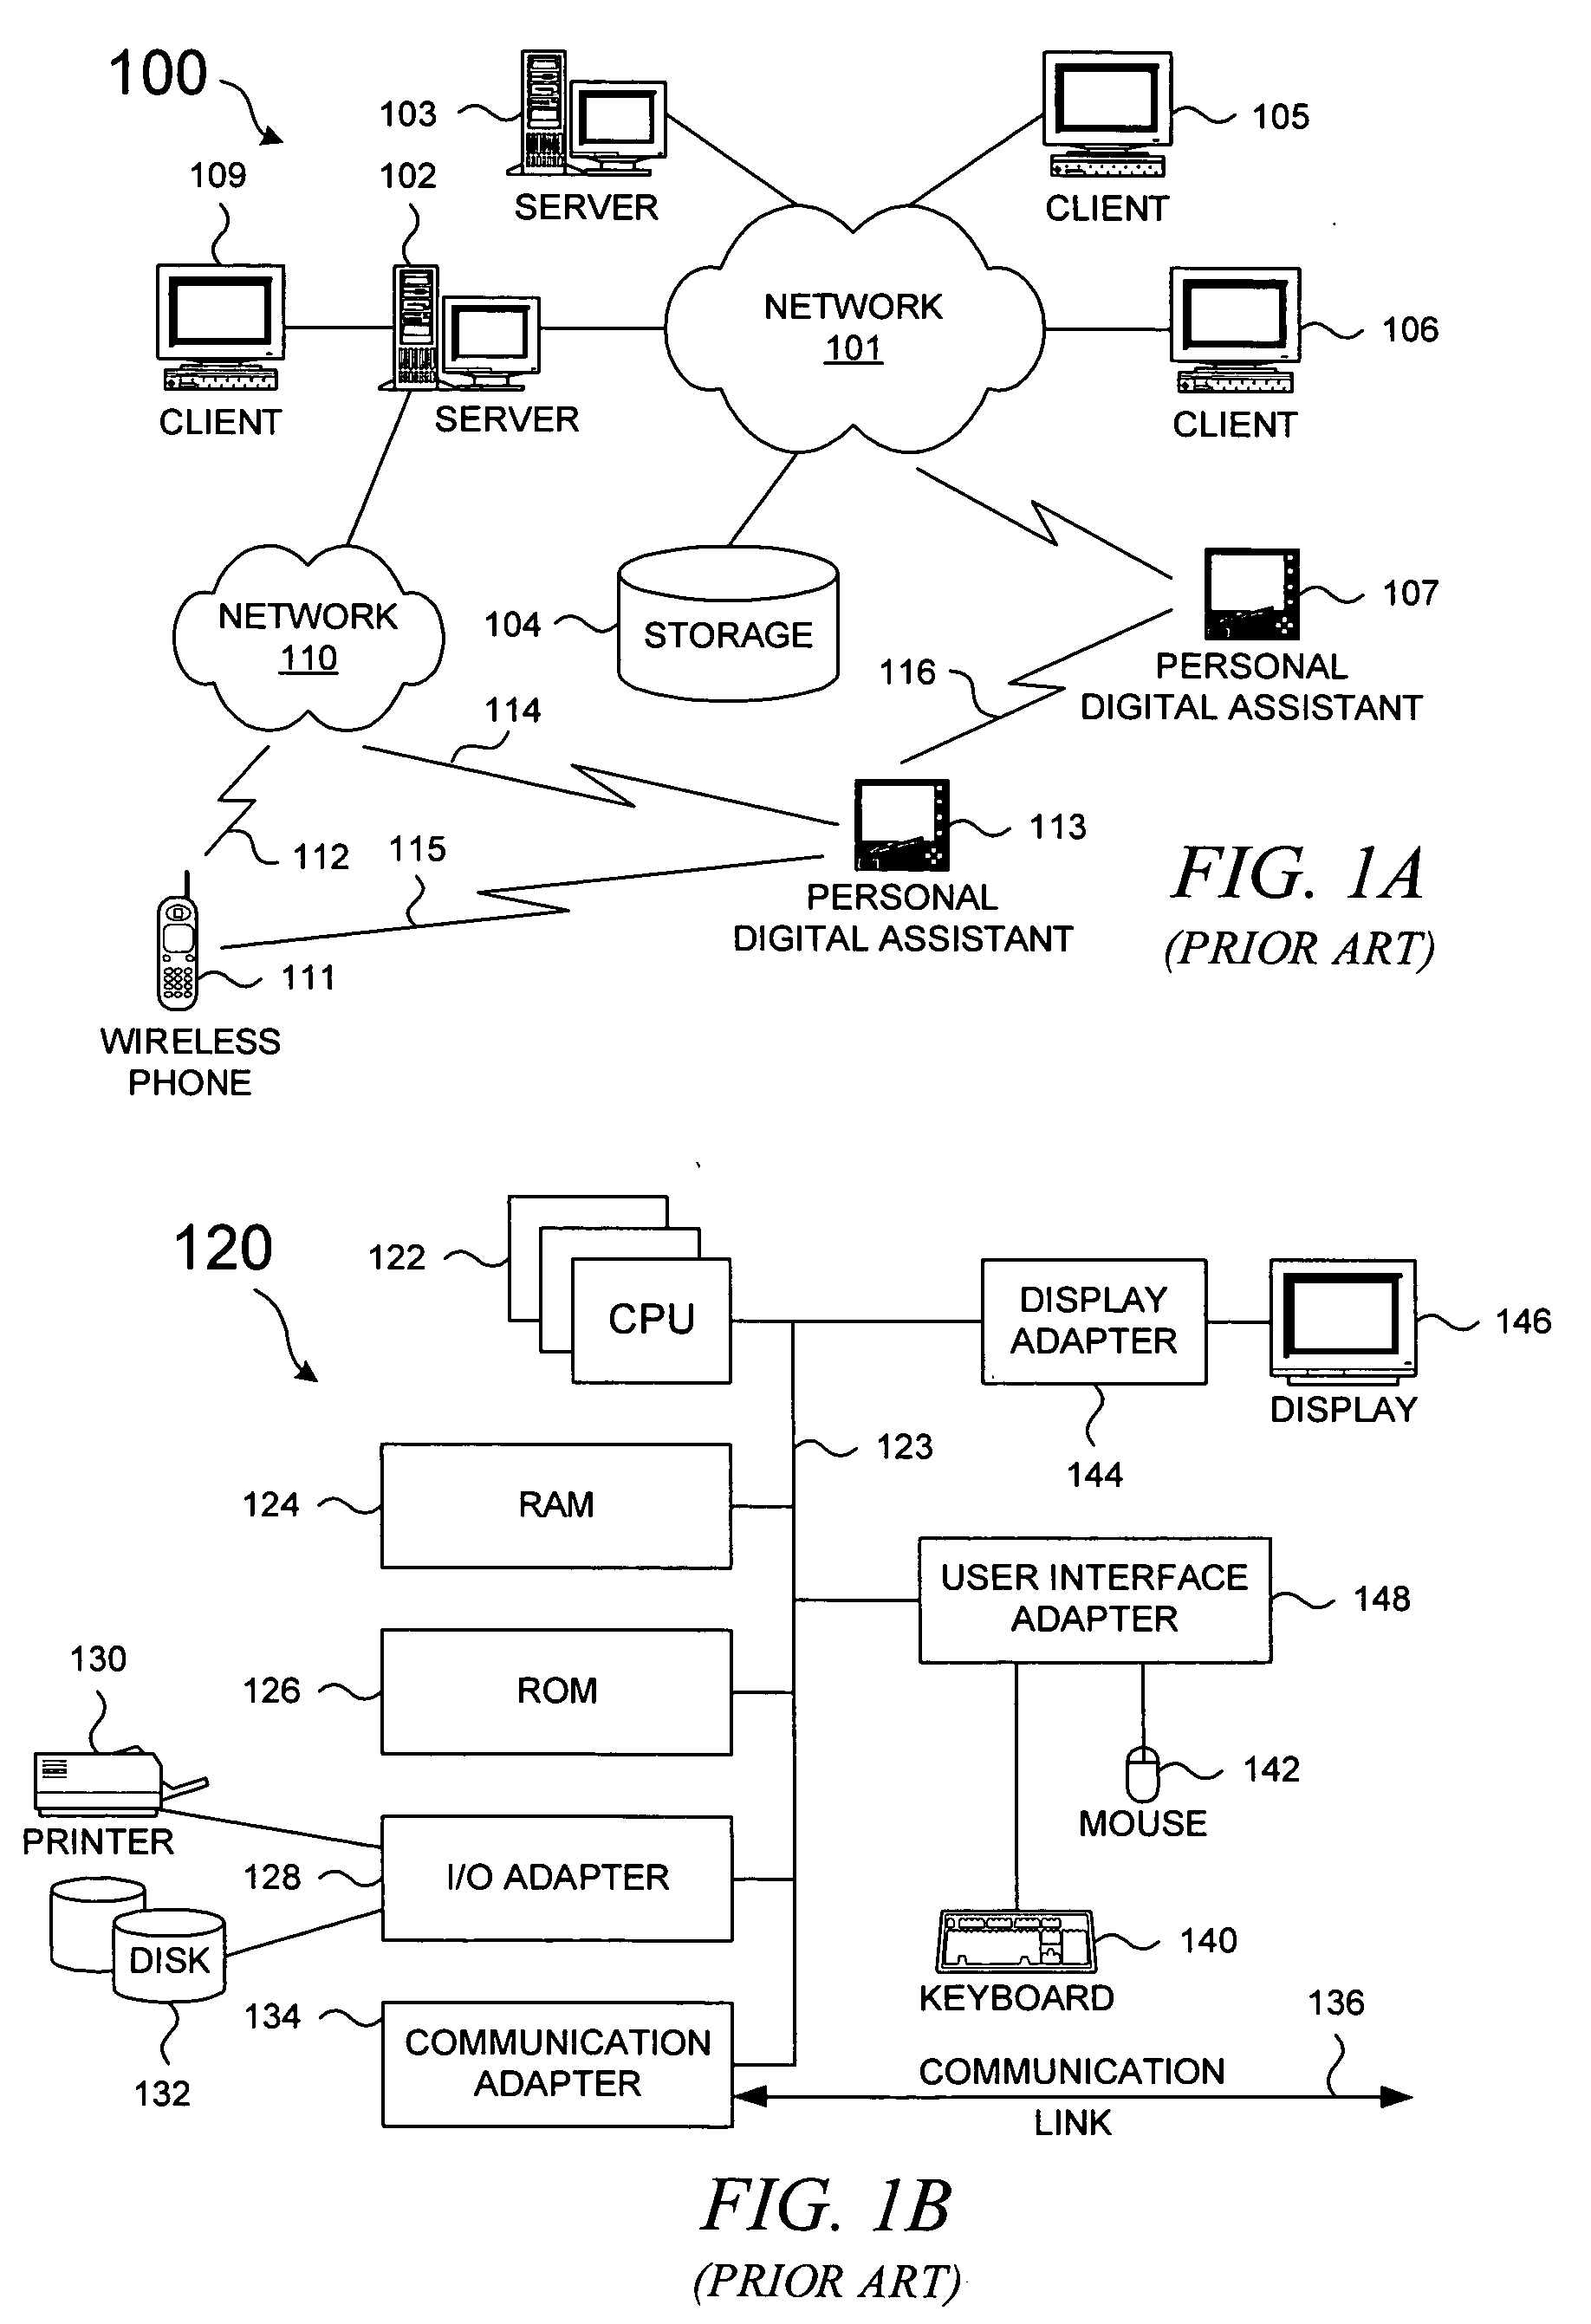 Method and system for extending authentication methods